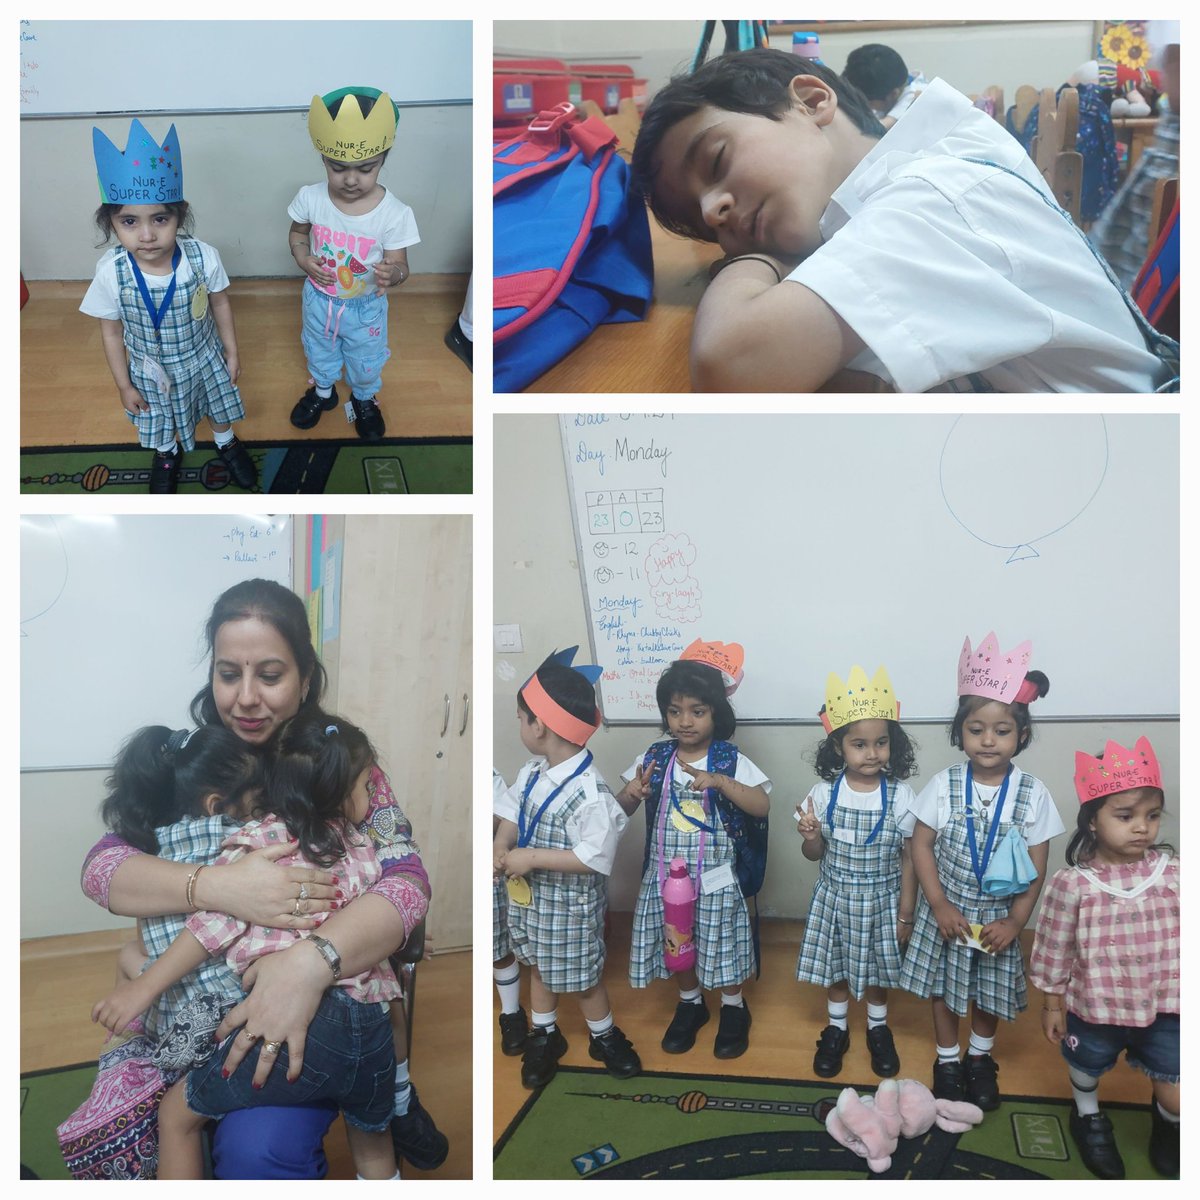 The first day of nursery was a whirlwind of emotions, from tearful goodbyes to excited discoveries. With each step into this world of wonder, a journey of growth and learning begins.@ashokkp @y_sanjay @pntduggal @ShandilyaPooja @ruchikapoor06